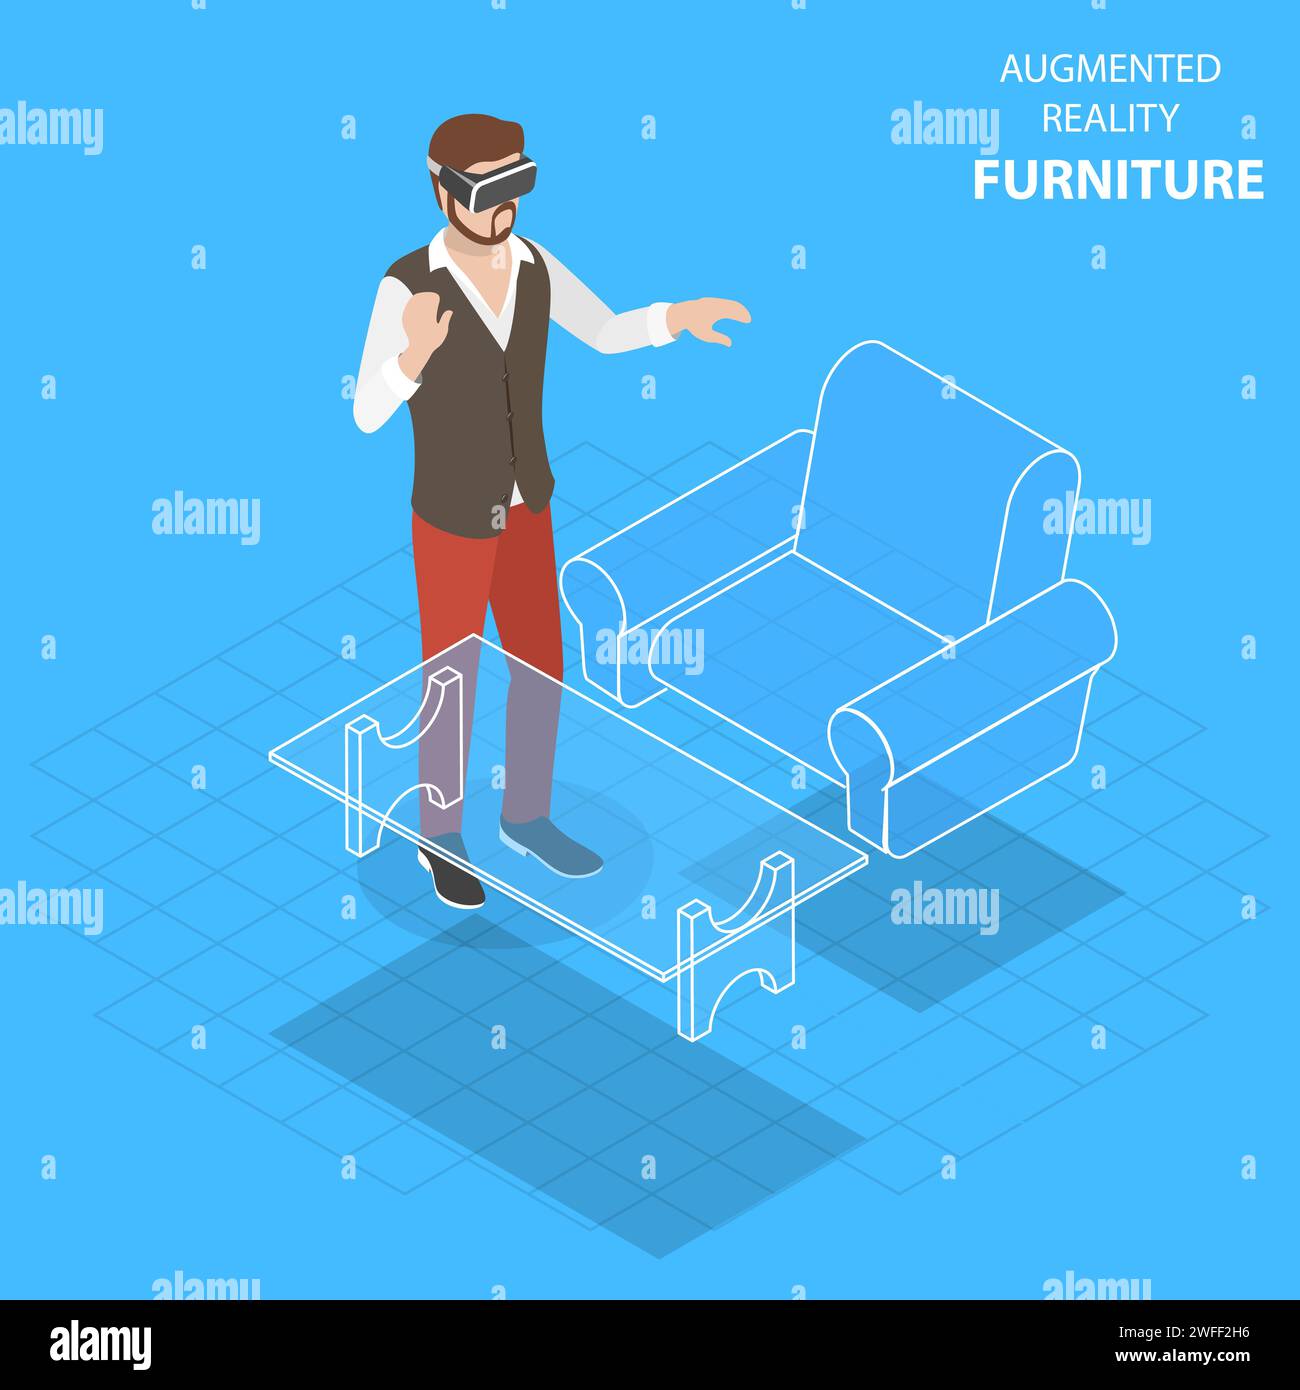 Flat isometric vector concept of augmented reality, virtual furniture. Stock Vector